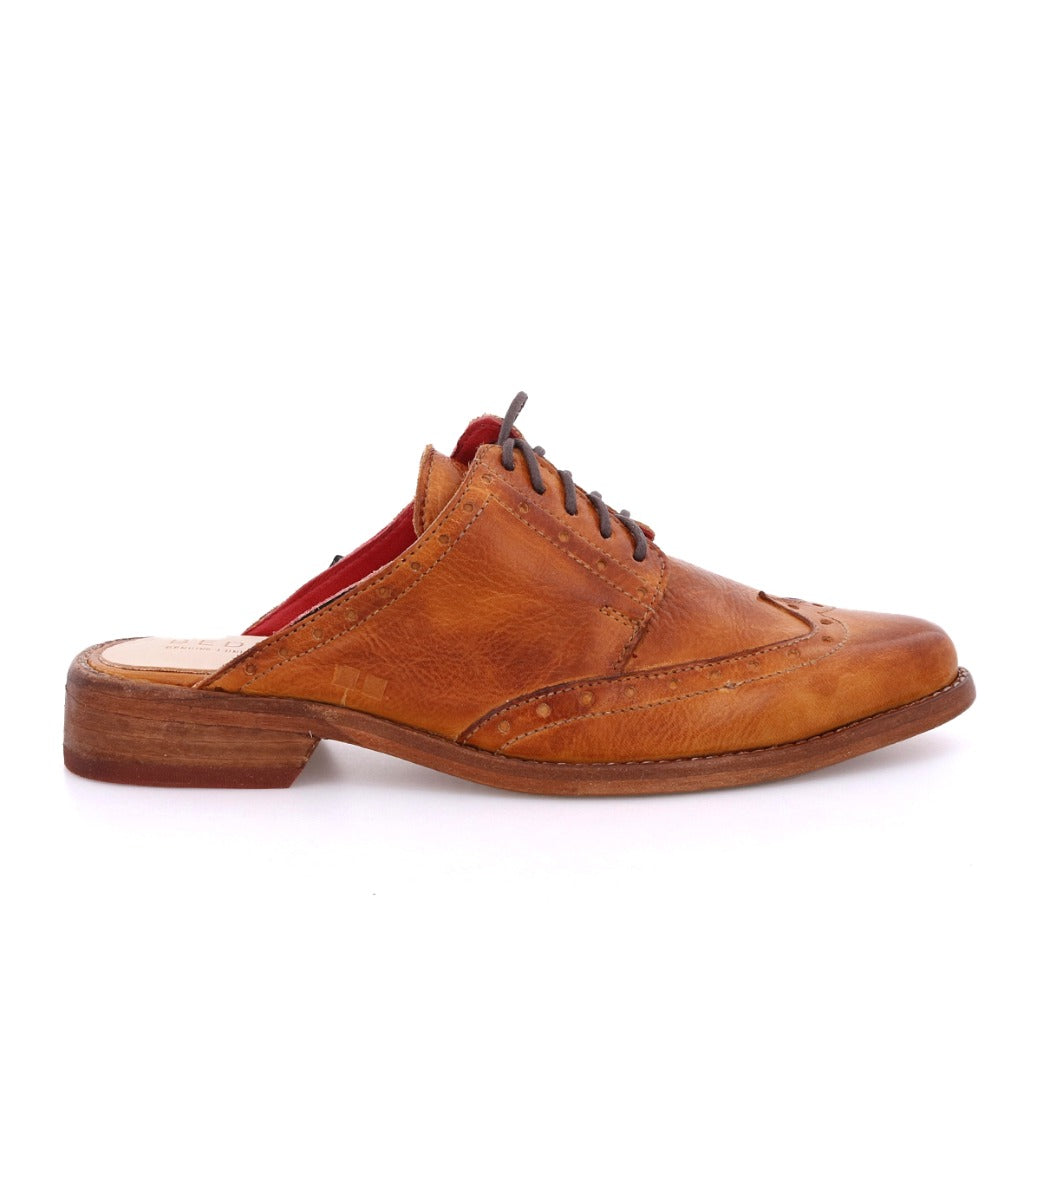 A Mickie by Bed Stu tan leather lace up shoe with a red sole.